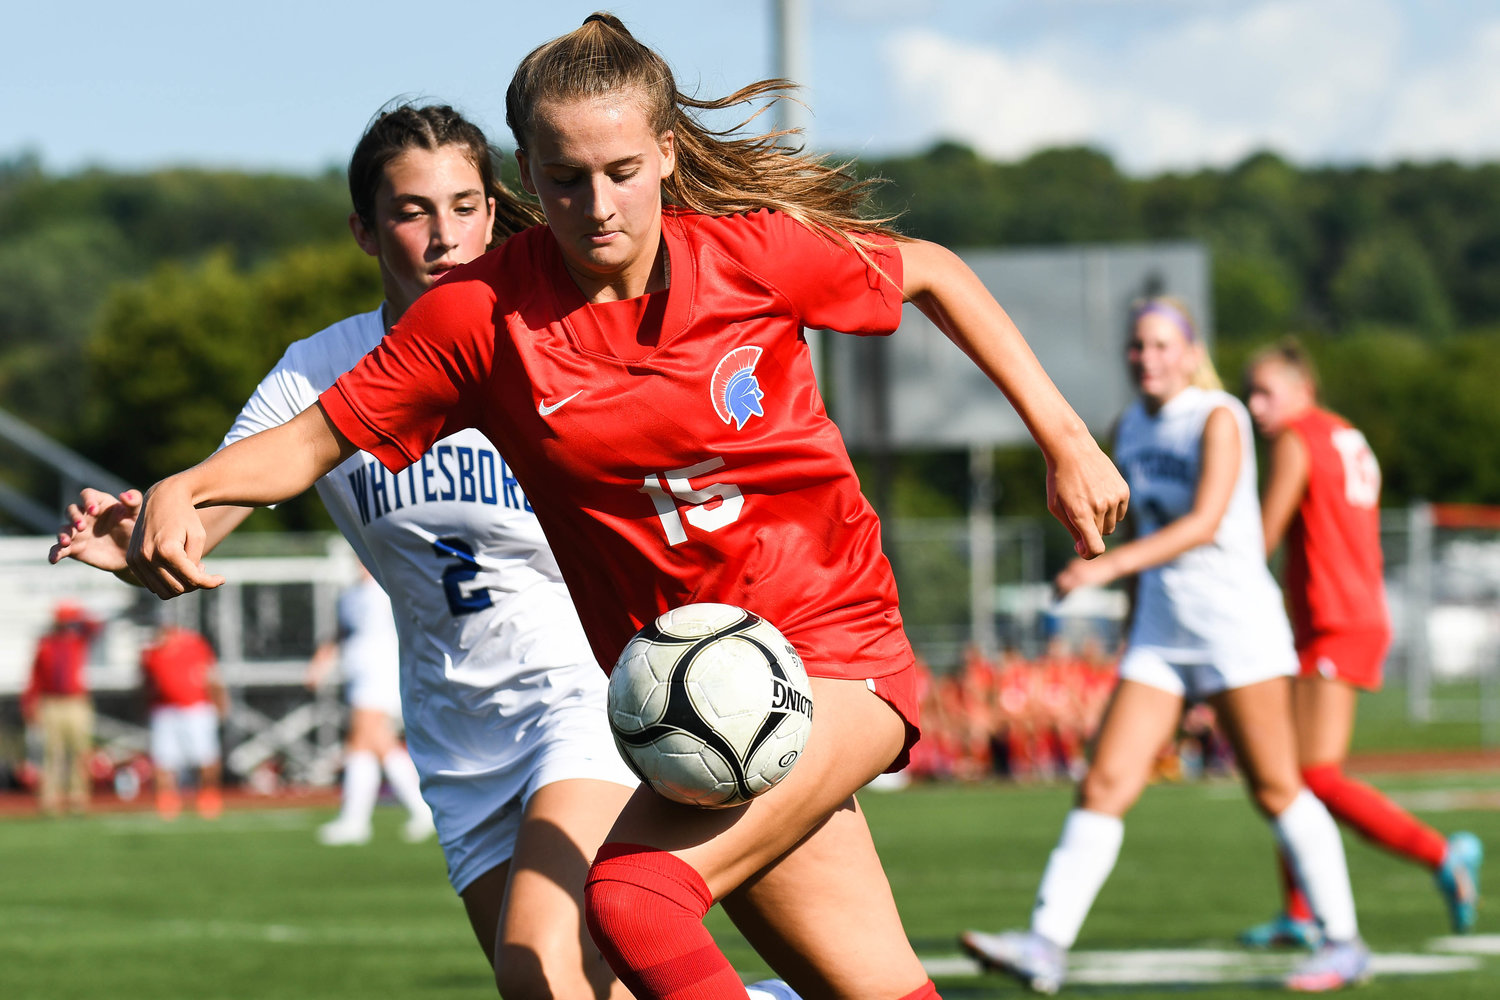 New Hartford’s Anna Rayhill moves the ball as Whitesboro’s Olivia Davis defends during the game on Thursday. Rayhill scored twice in the Spartans’ 5-0 win.